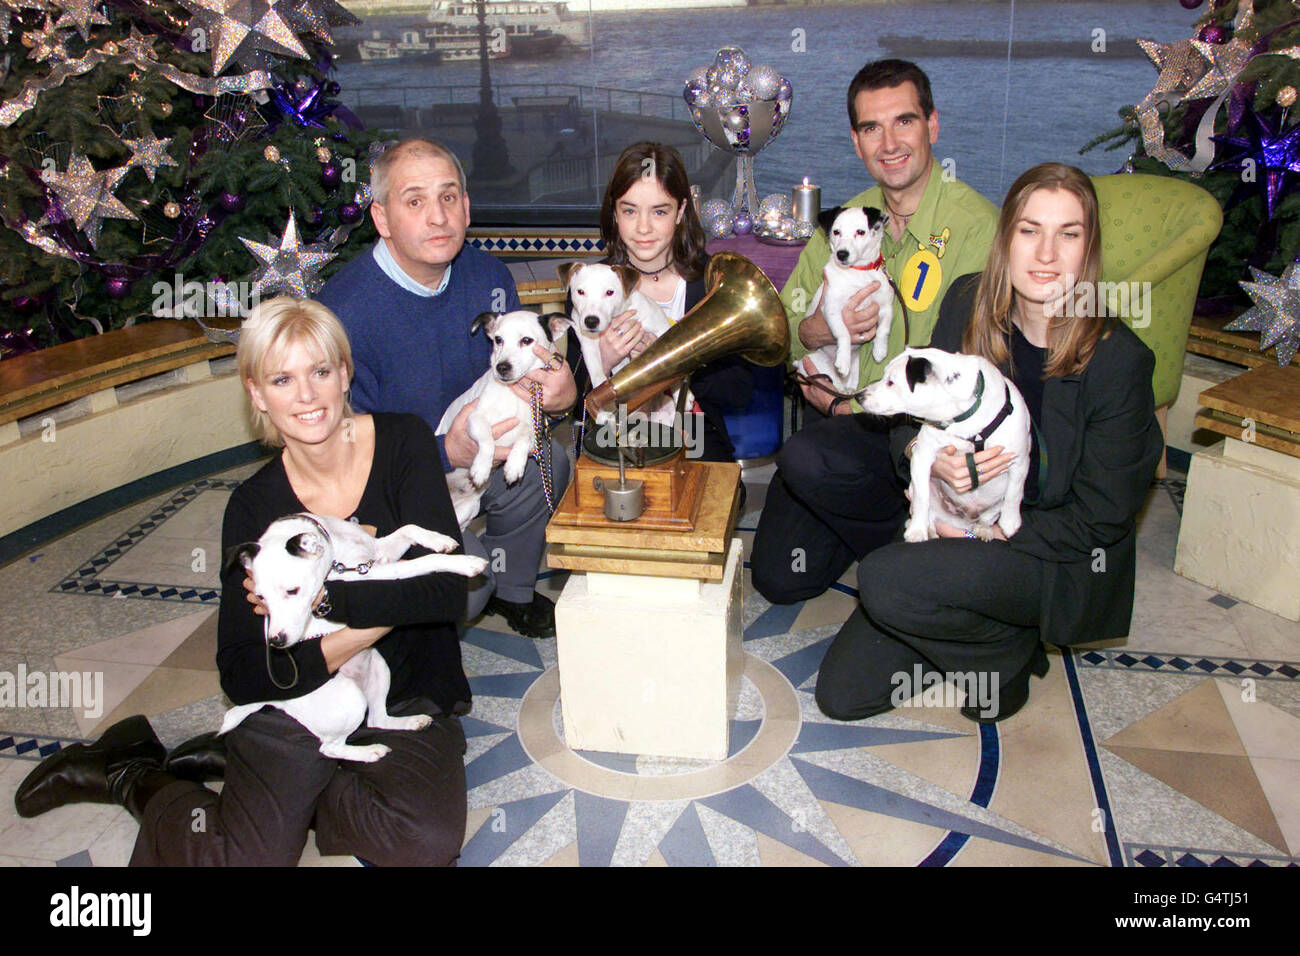 The shortlisted terrier dogs and their owners competing for the new mascot of the HMV chain on ITV's This Morning. (L-R) Lisa Davies and Meg (the winners), Dave Leigh and Nipper, Sam Tale and Ricky, Steve Dickens and Nippy and Julie Prescott and Ben. * The music chain is renowned for its dog and trumpet logo featuring a Jack Russell staring quizzically into a gramophone. HMV has been looking for a new representative since the old one retired after 10 years of service. Stock Photo